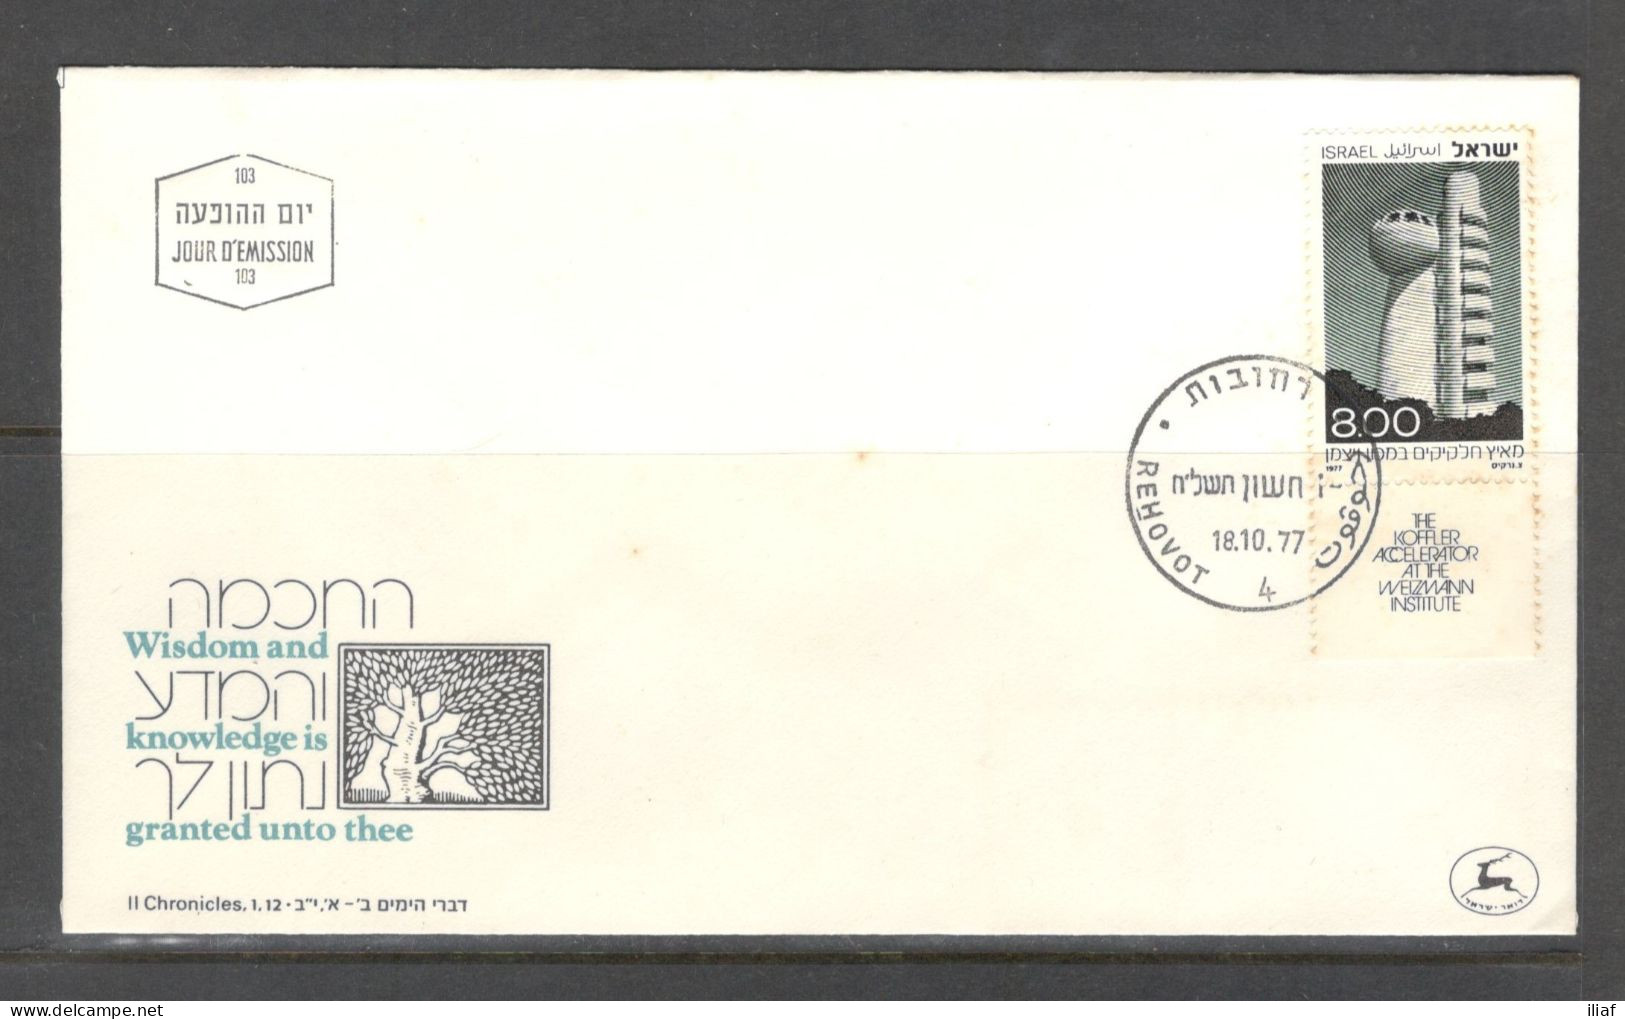 Israel 1977 FDC Sc. 647  “Koffler” Particle Acceleration At The Weizmann Institu FDC Cancellation On Cachet FDC Envelope - FDC